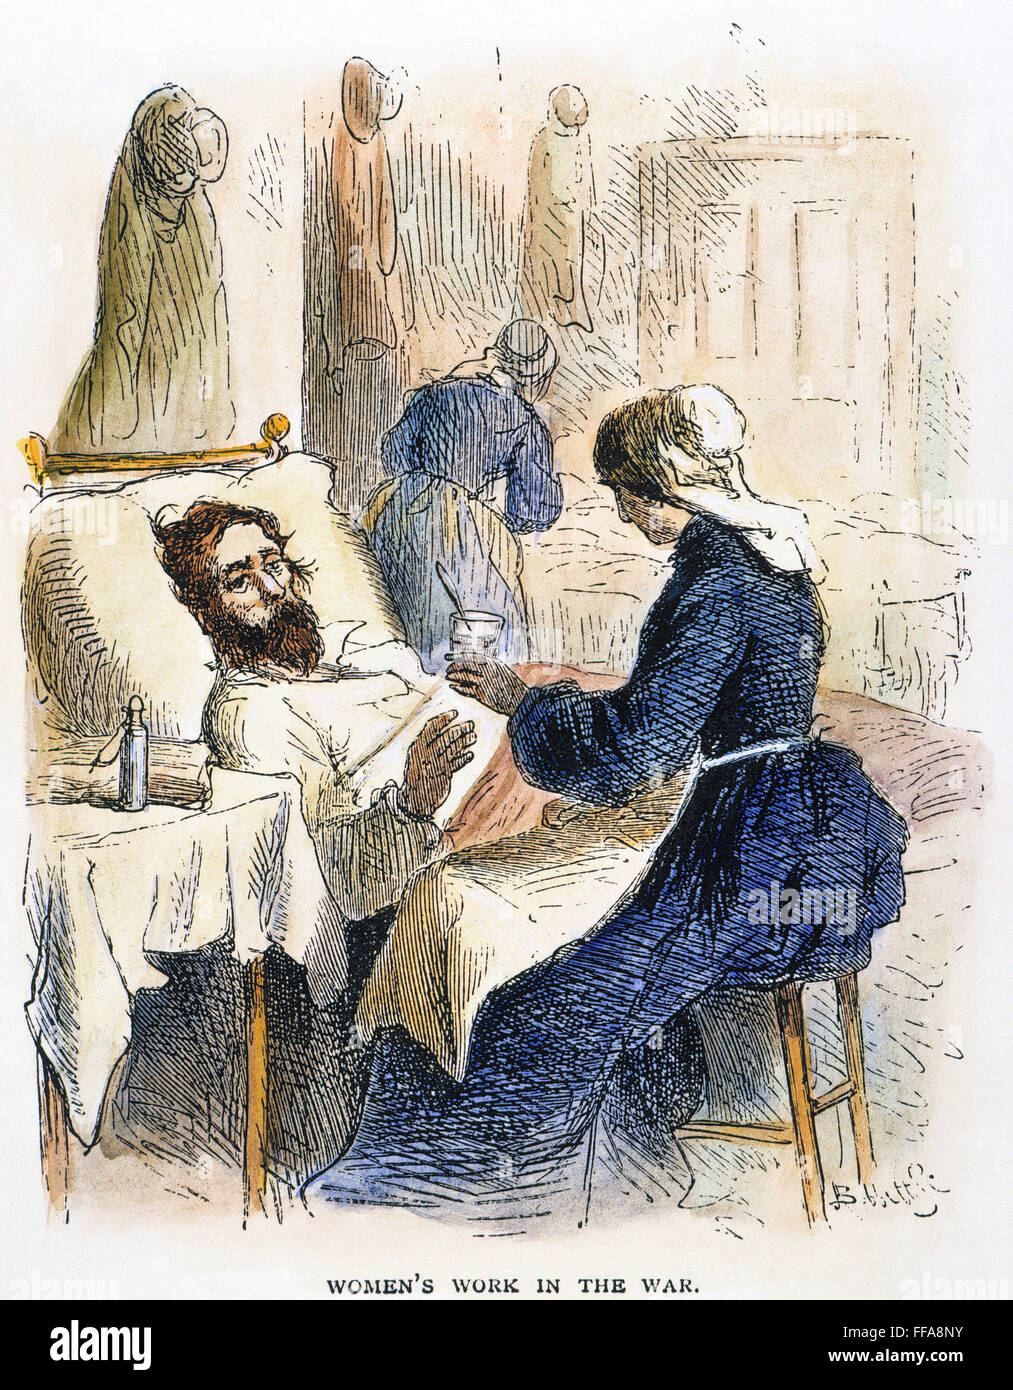 UNION ARMY HOSPITAL. /nScene in a Union Army hospital during the American Civil War: contemporary colored engraving. Stock Photo